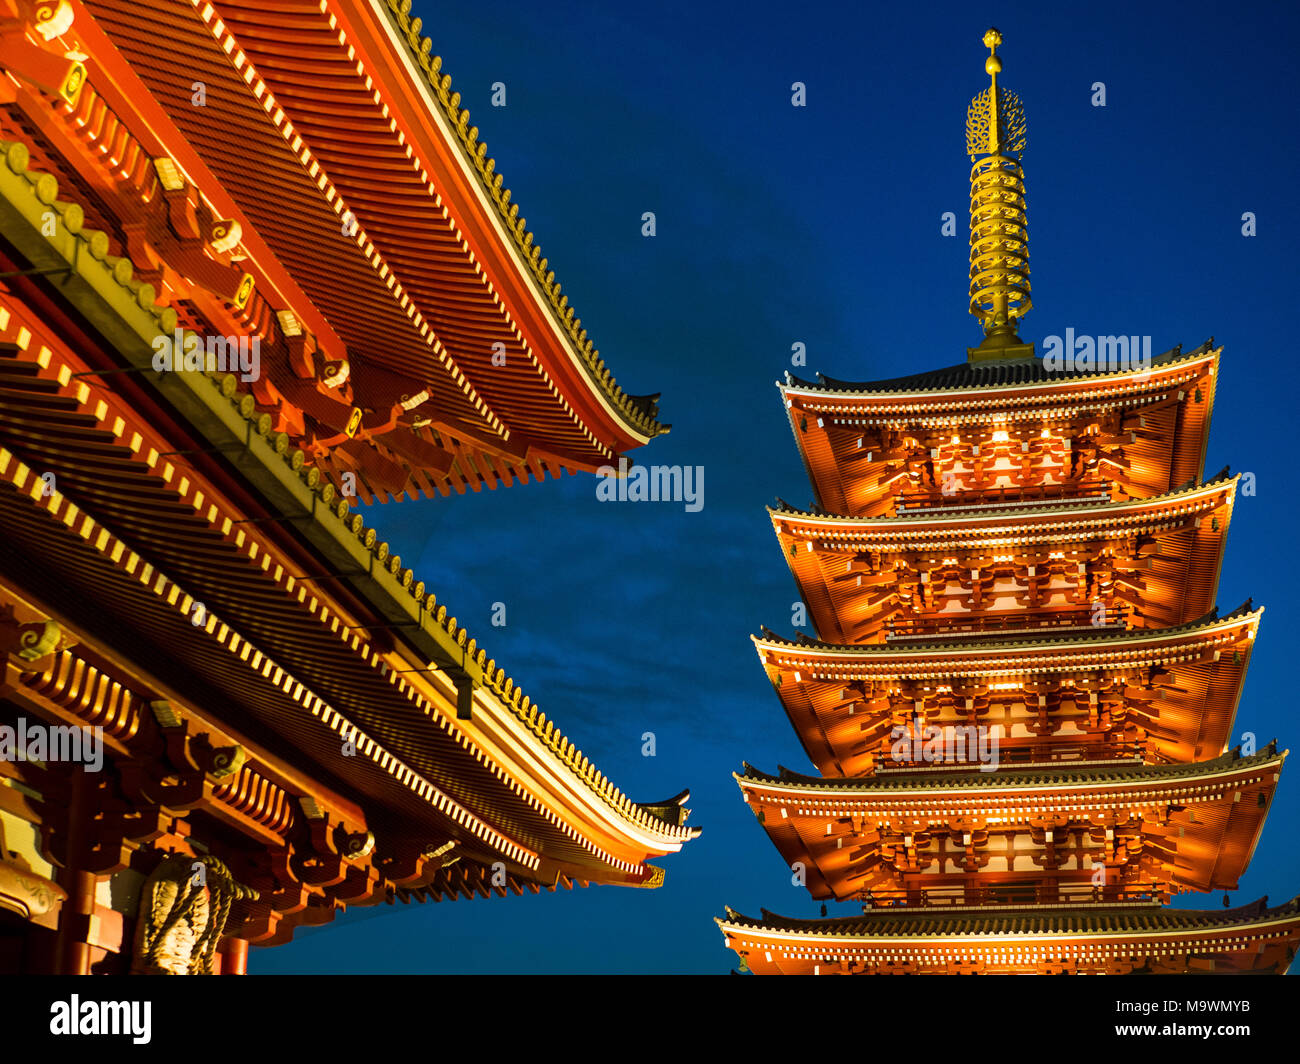 Asakusa Senso ji or Senso-ji Tokyo Temple in Asakusa district - the oldest temple in Tokyo, believed to have been founded in 645. Tokyo Tourism. Stock Photo